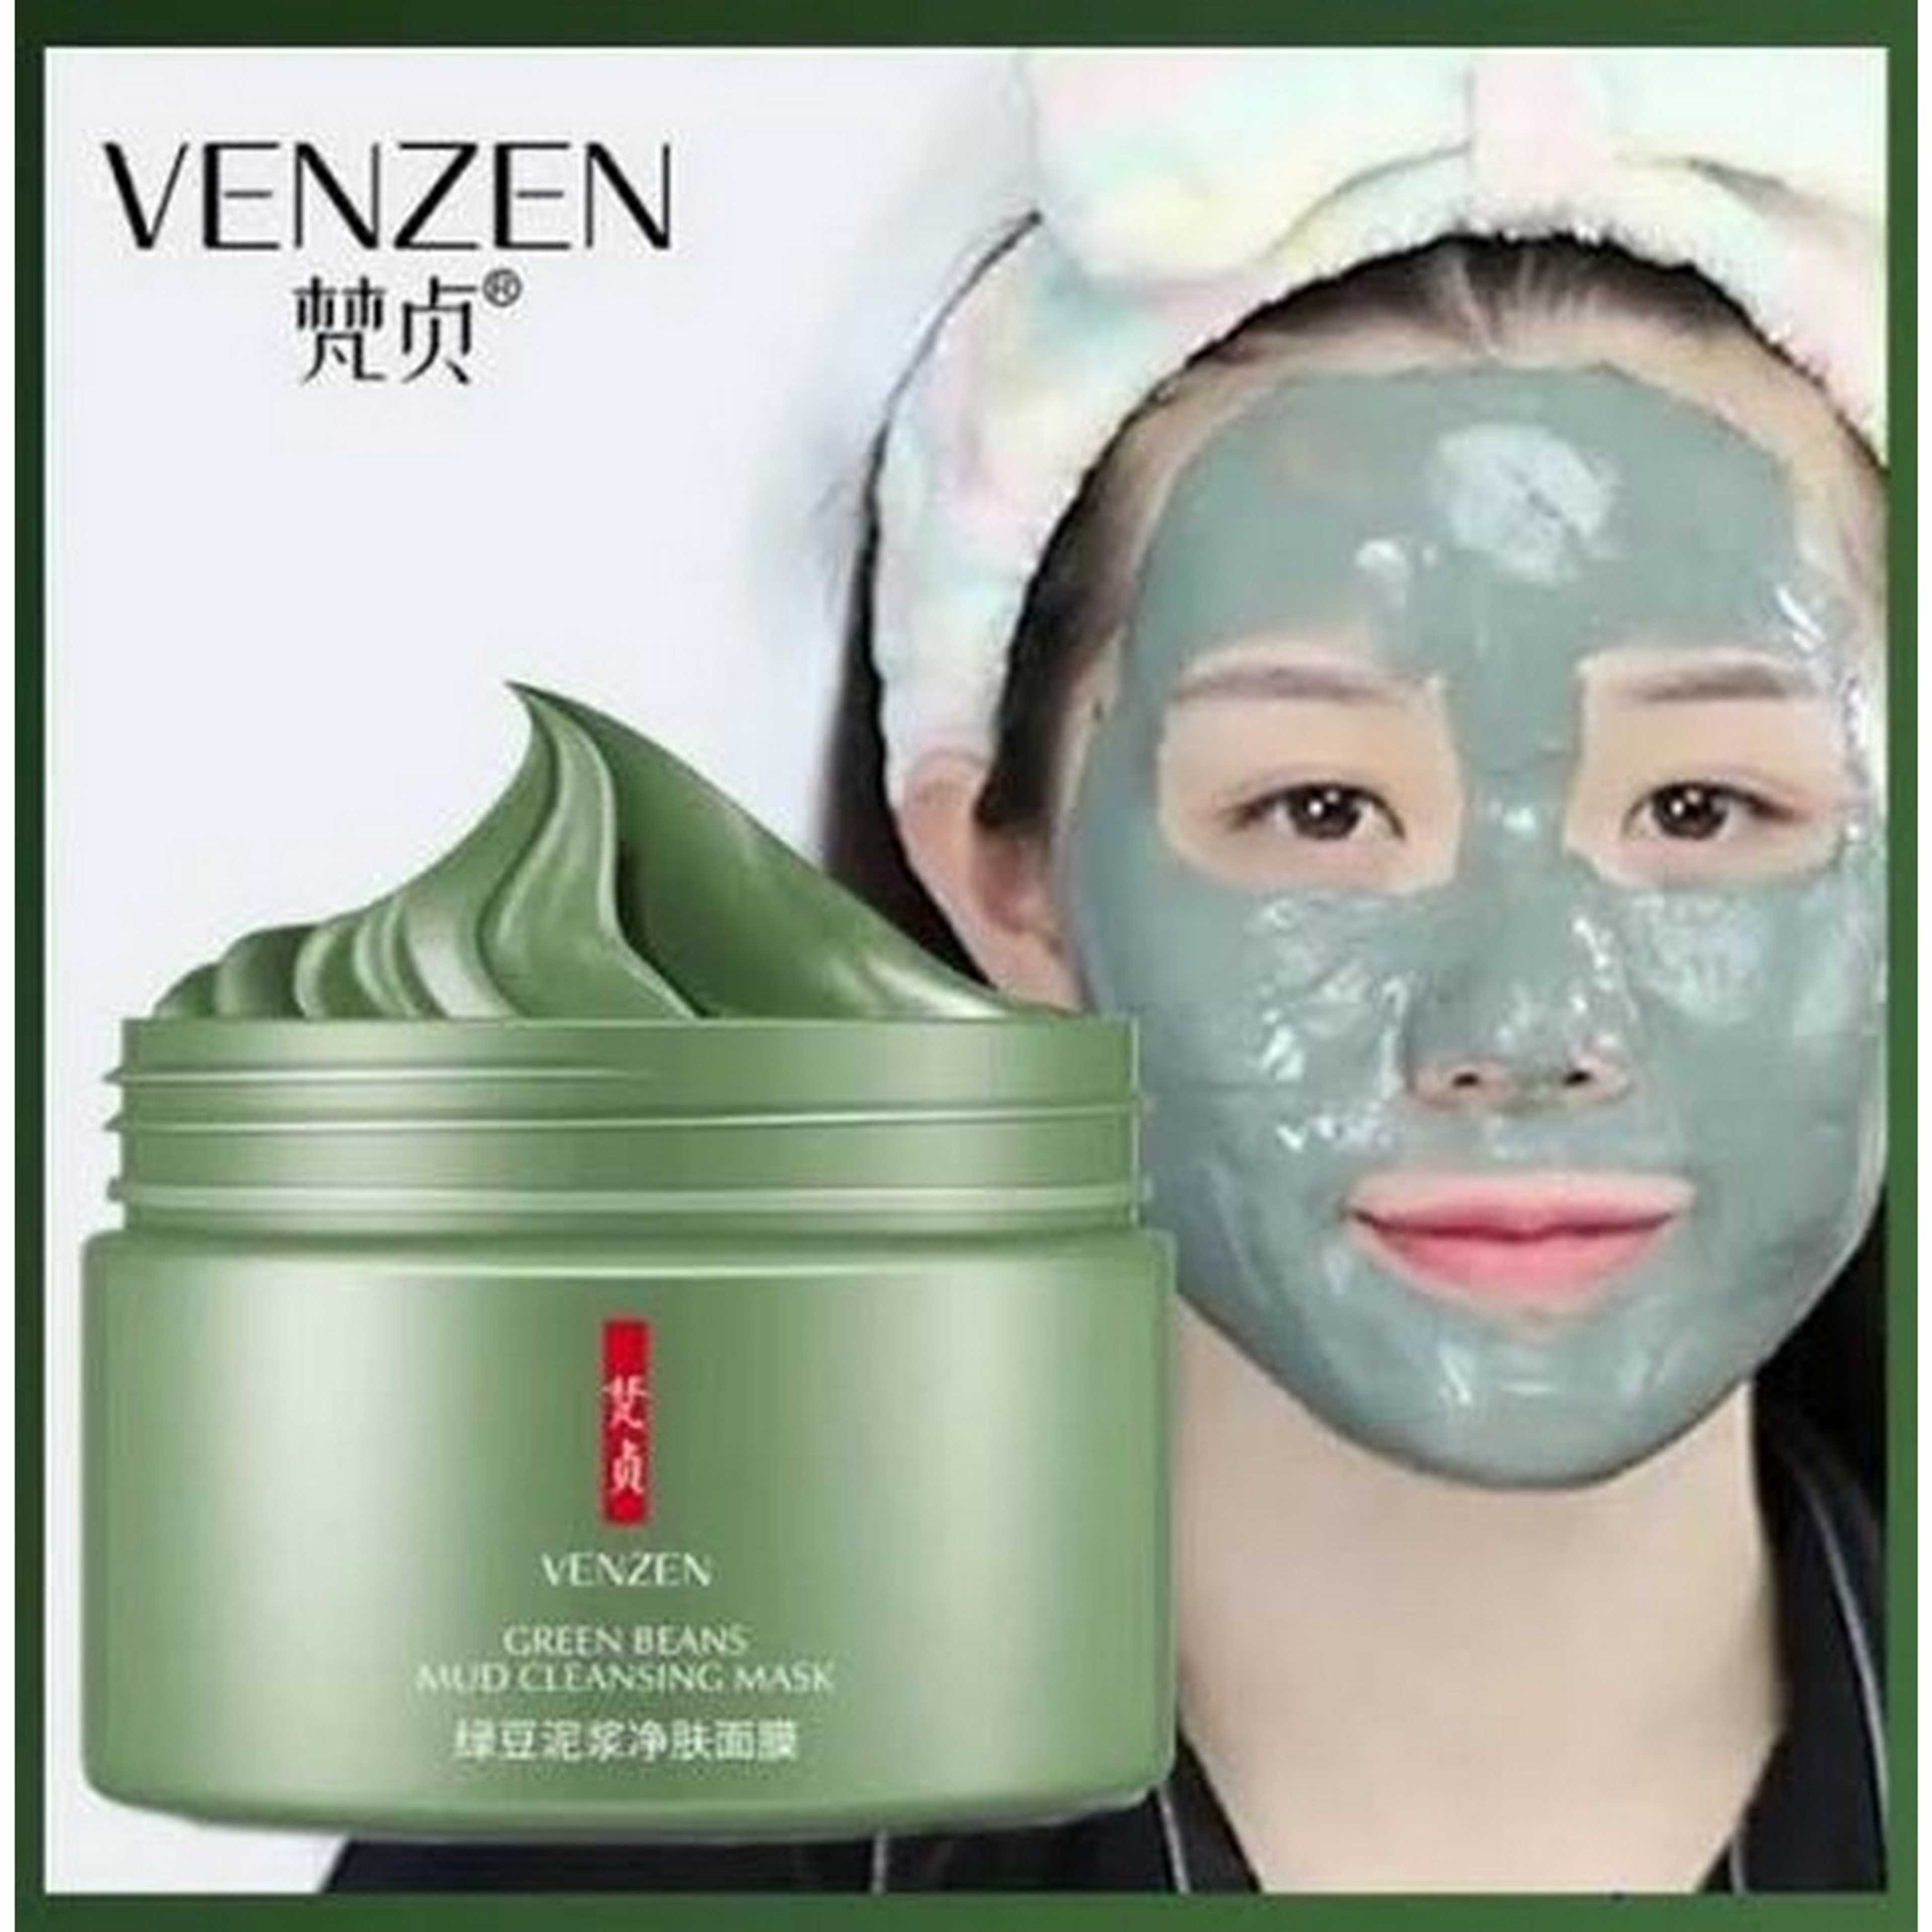 Green Beans Mud Cleansing Mask